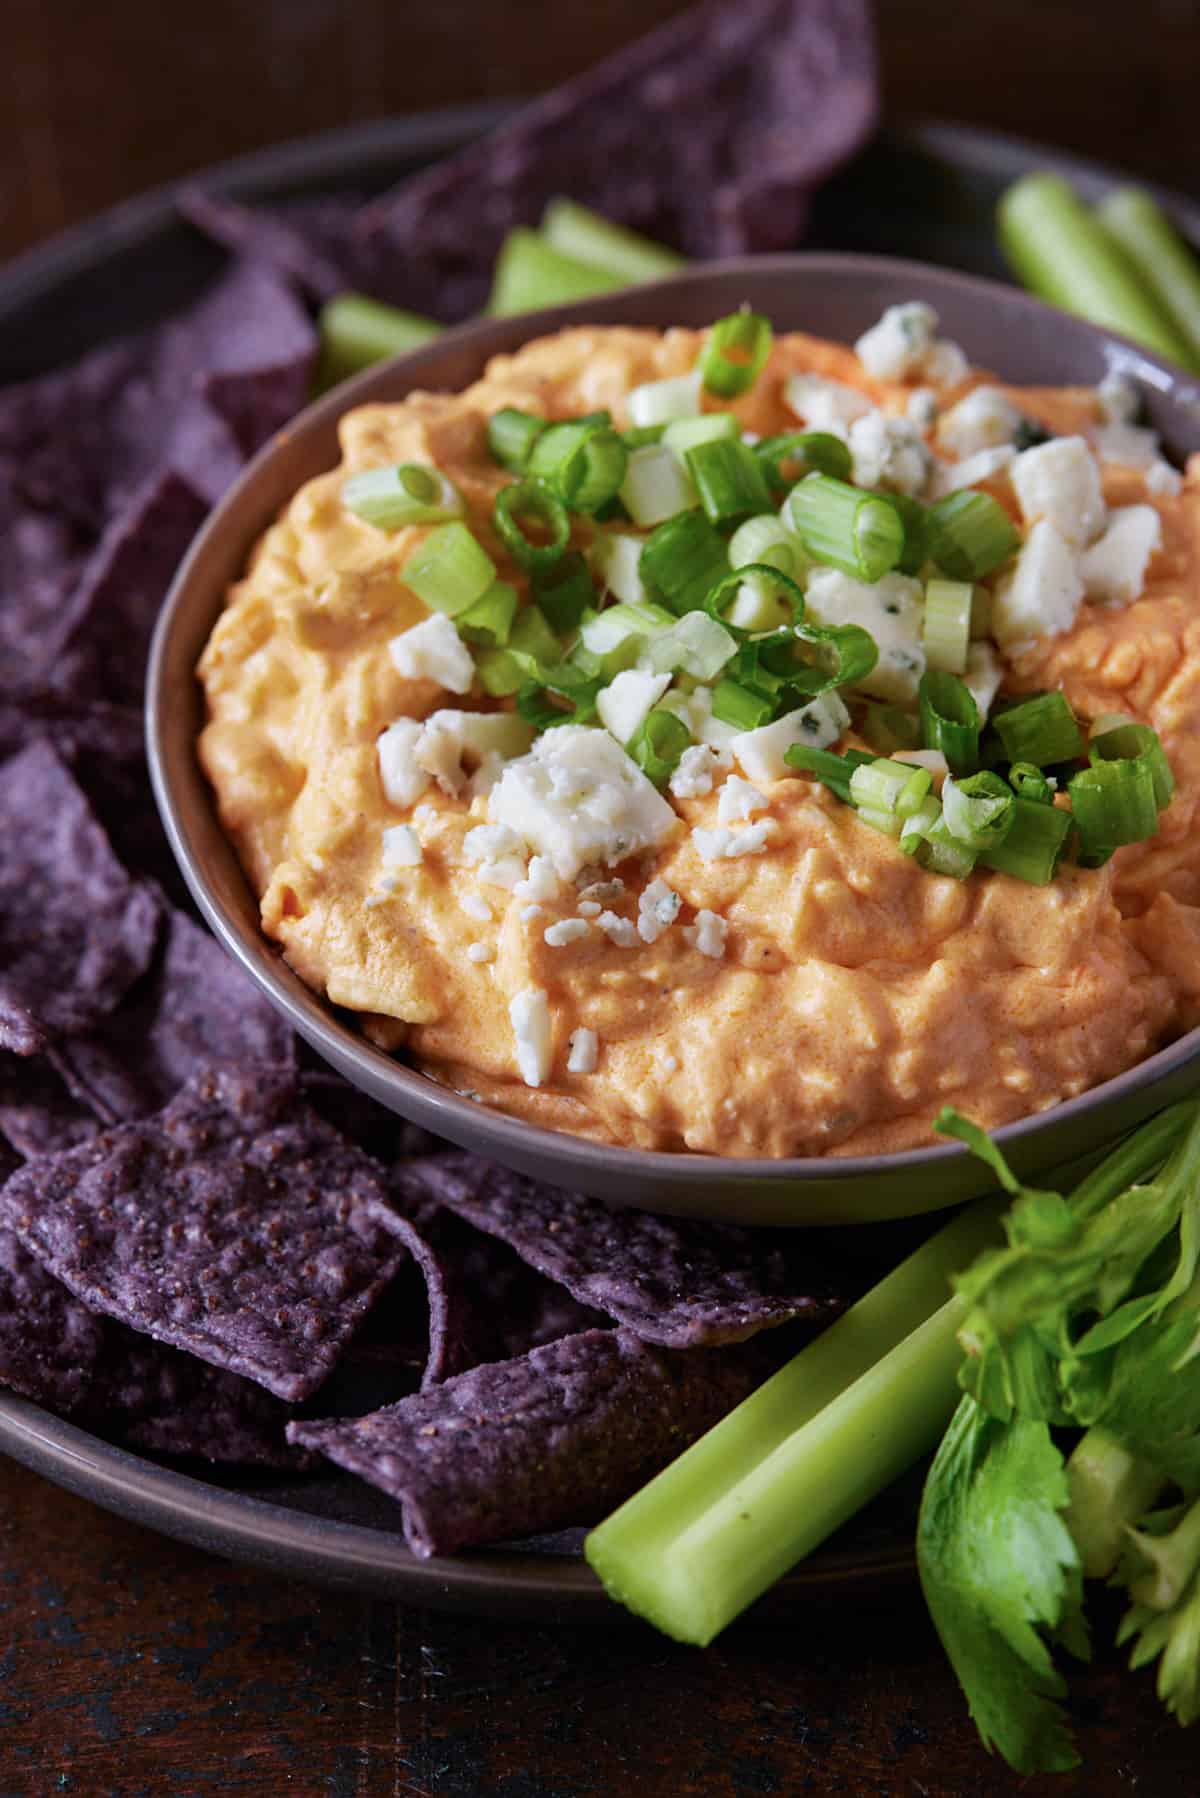 Buffalo Dip with blue cheese crumbles in a bowl.